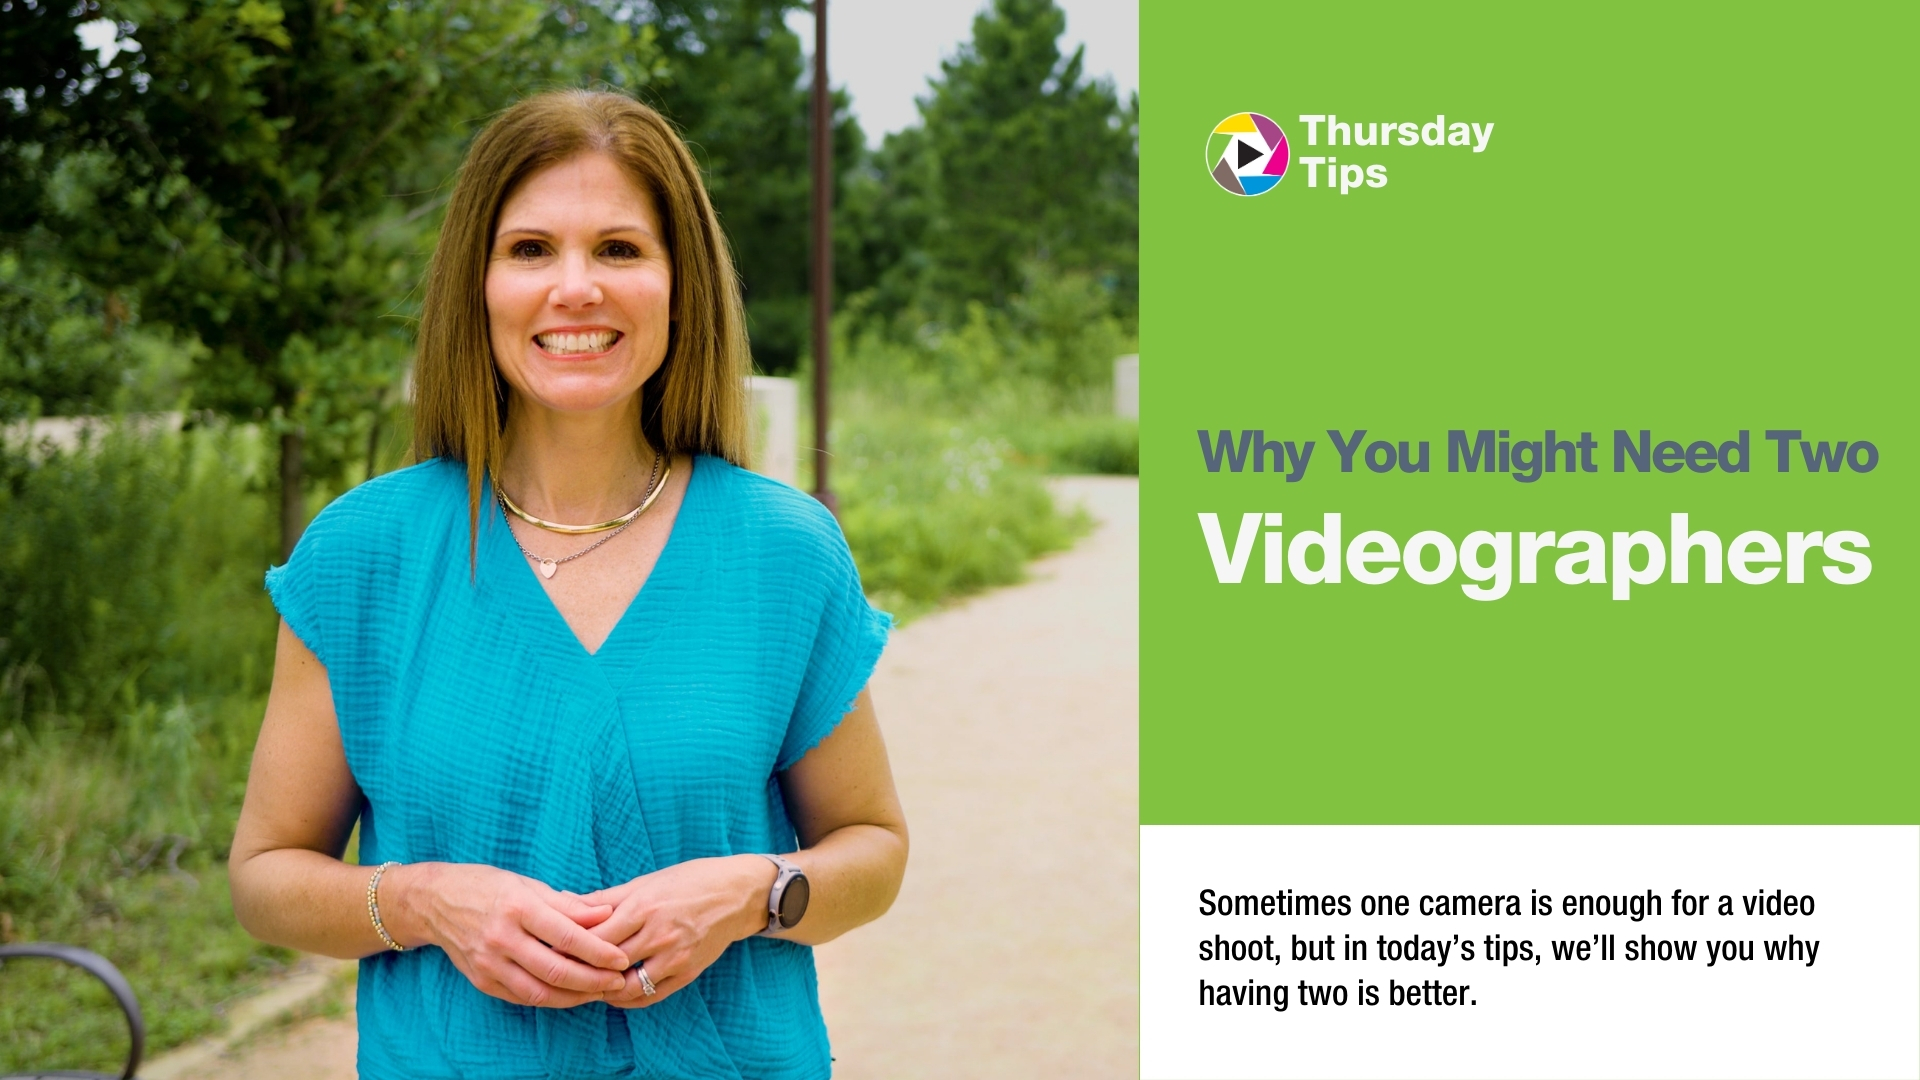 Thursday Tips: Why You Might Need Two Videographers